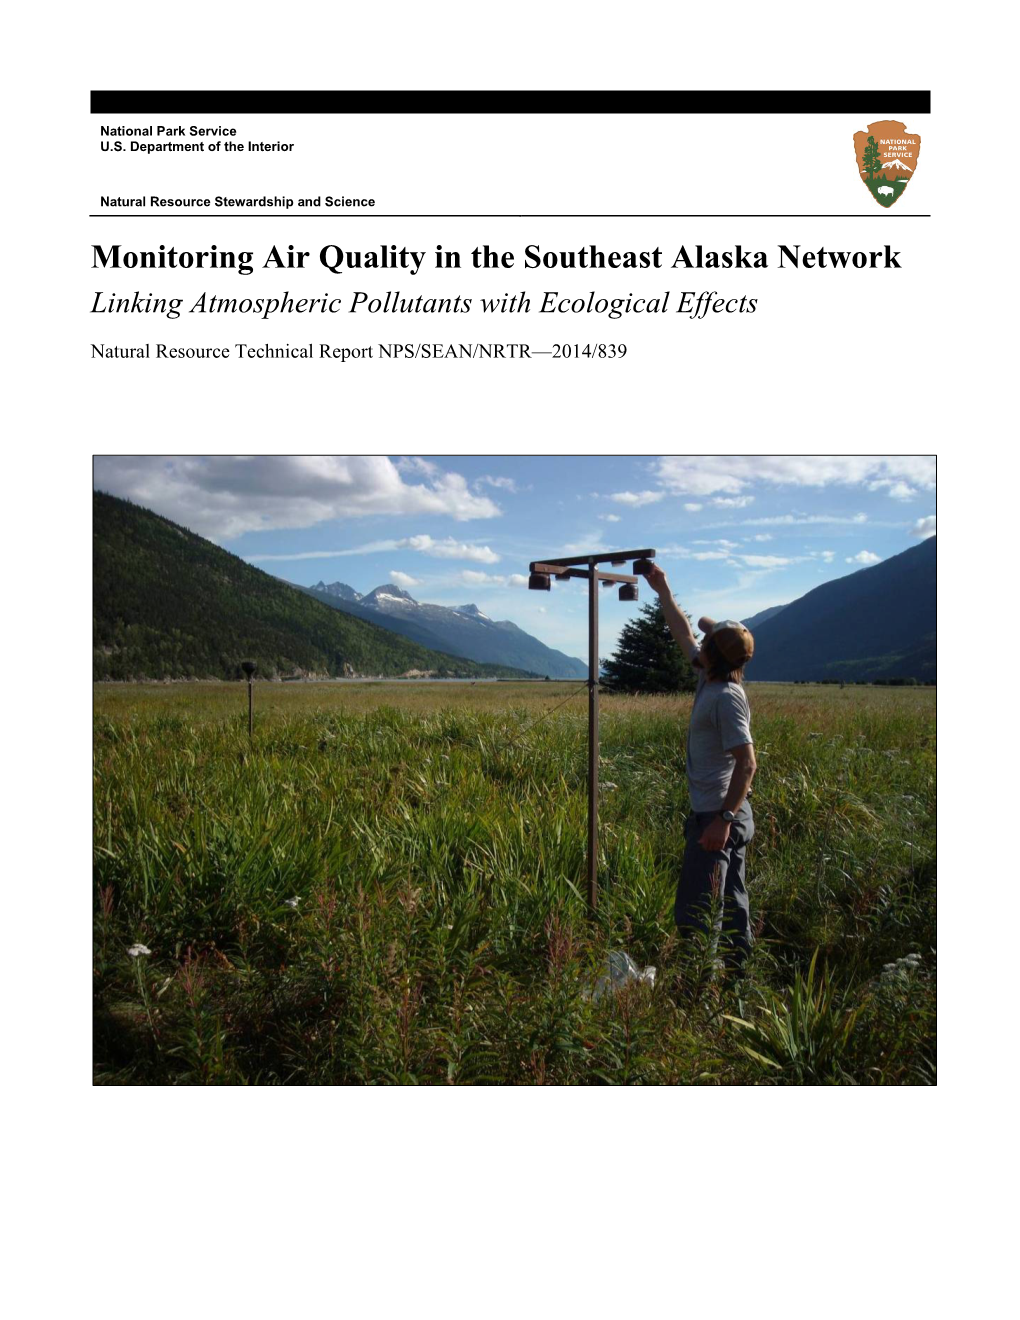 Monitoring Air Quality in the Southeast Alaska Network Linking Atmospheric Pollutants with Ecological Effects